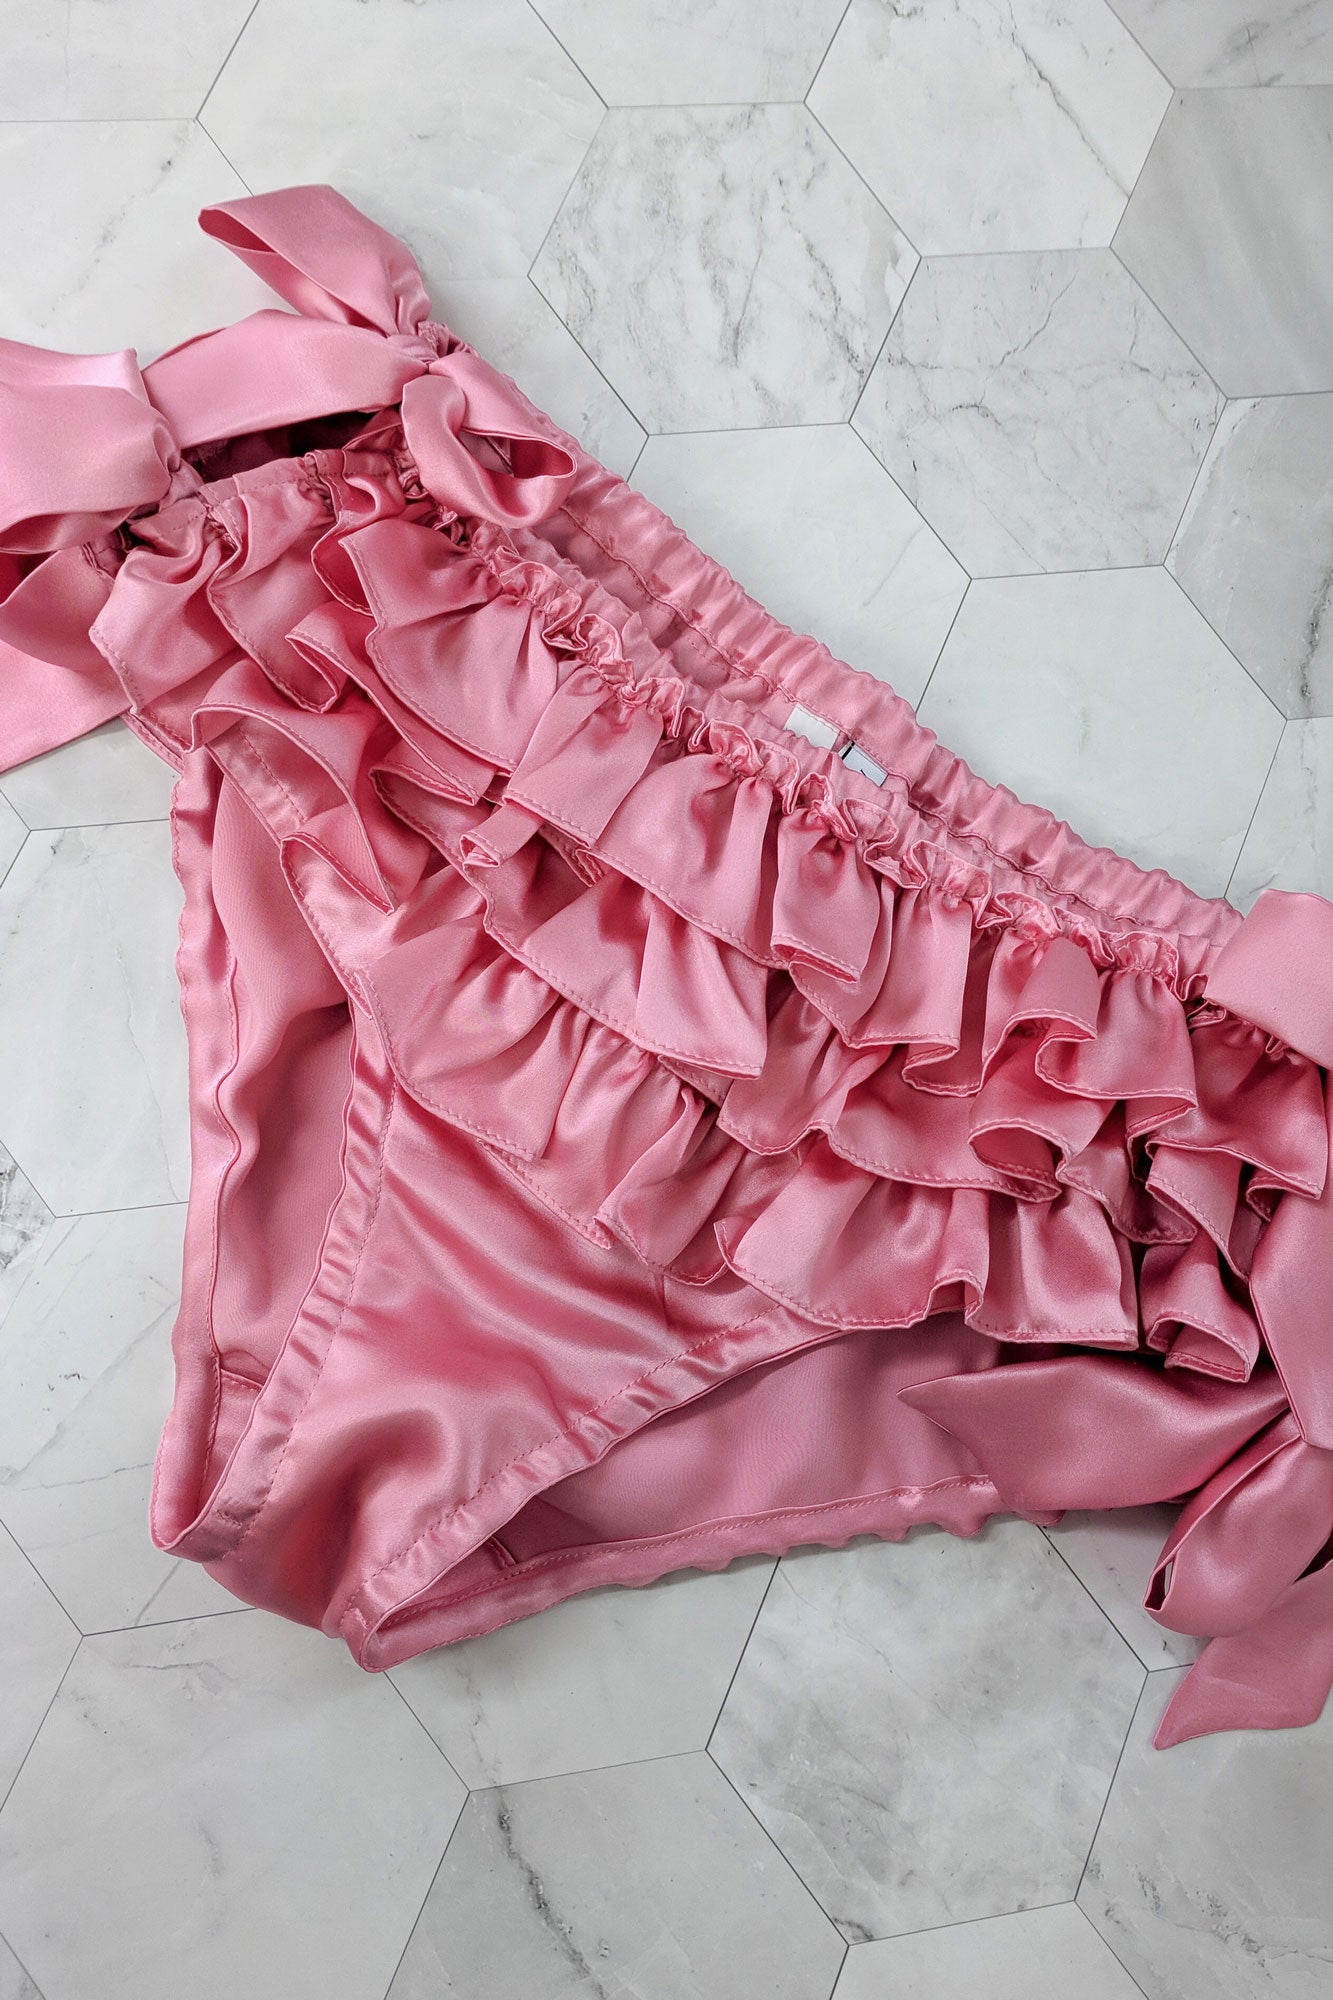 Silk ruffled panties in rose pink satin with 3 ruffles and side tie bows